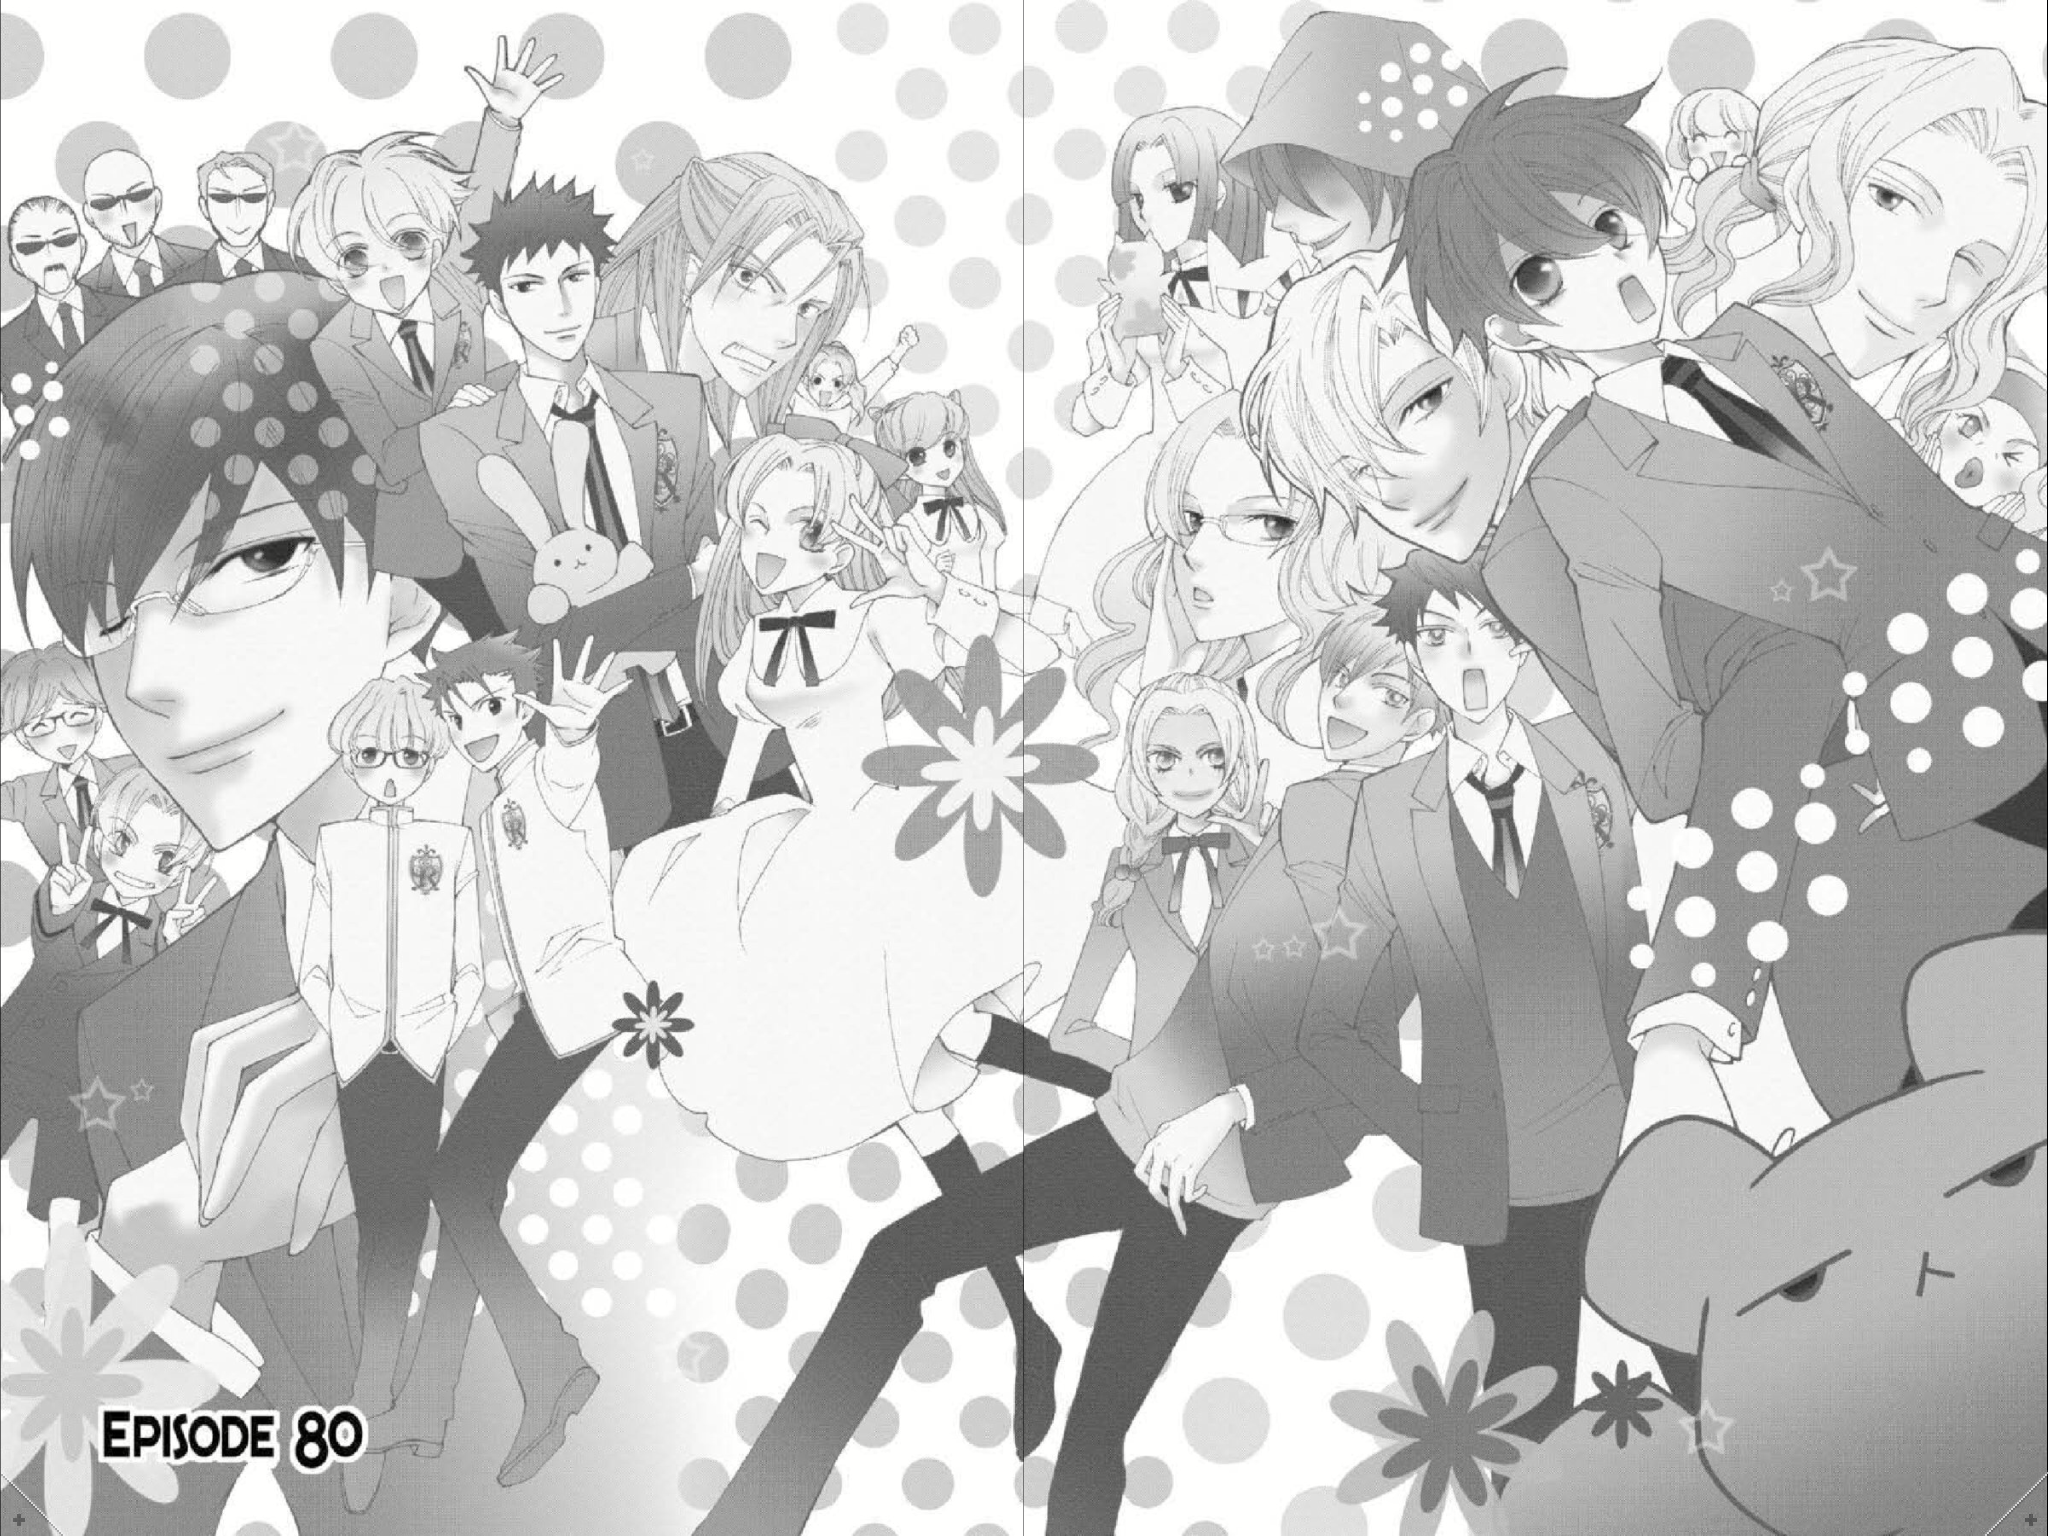 Manga You Dont Have to Wait for Ouran High School Host Club< | The Mary Sue